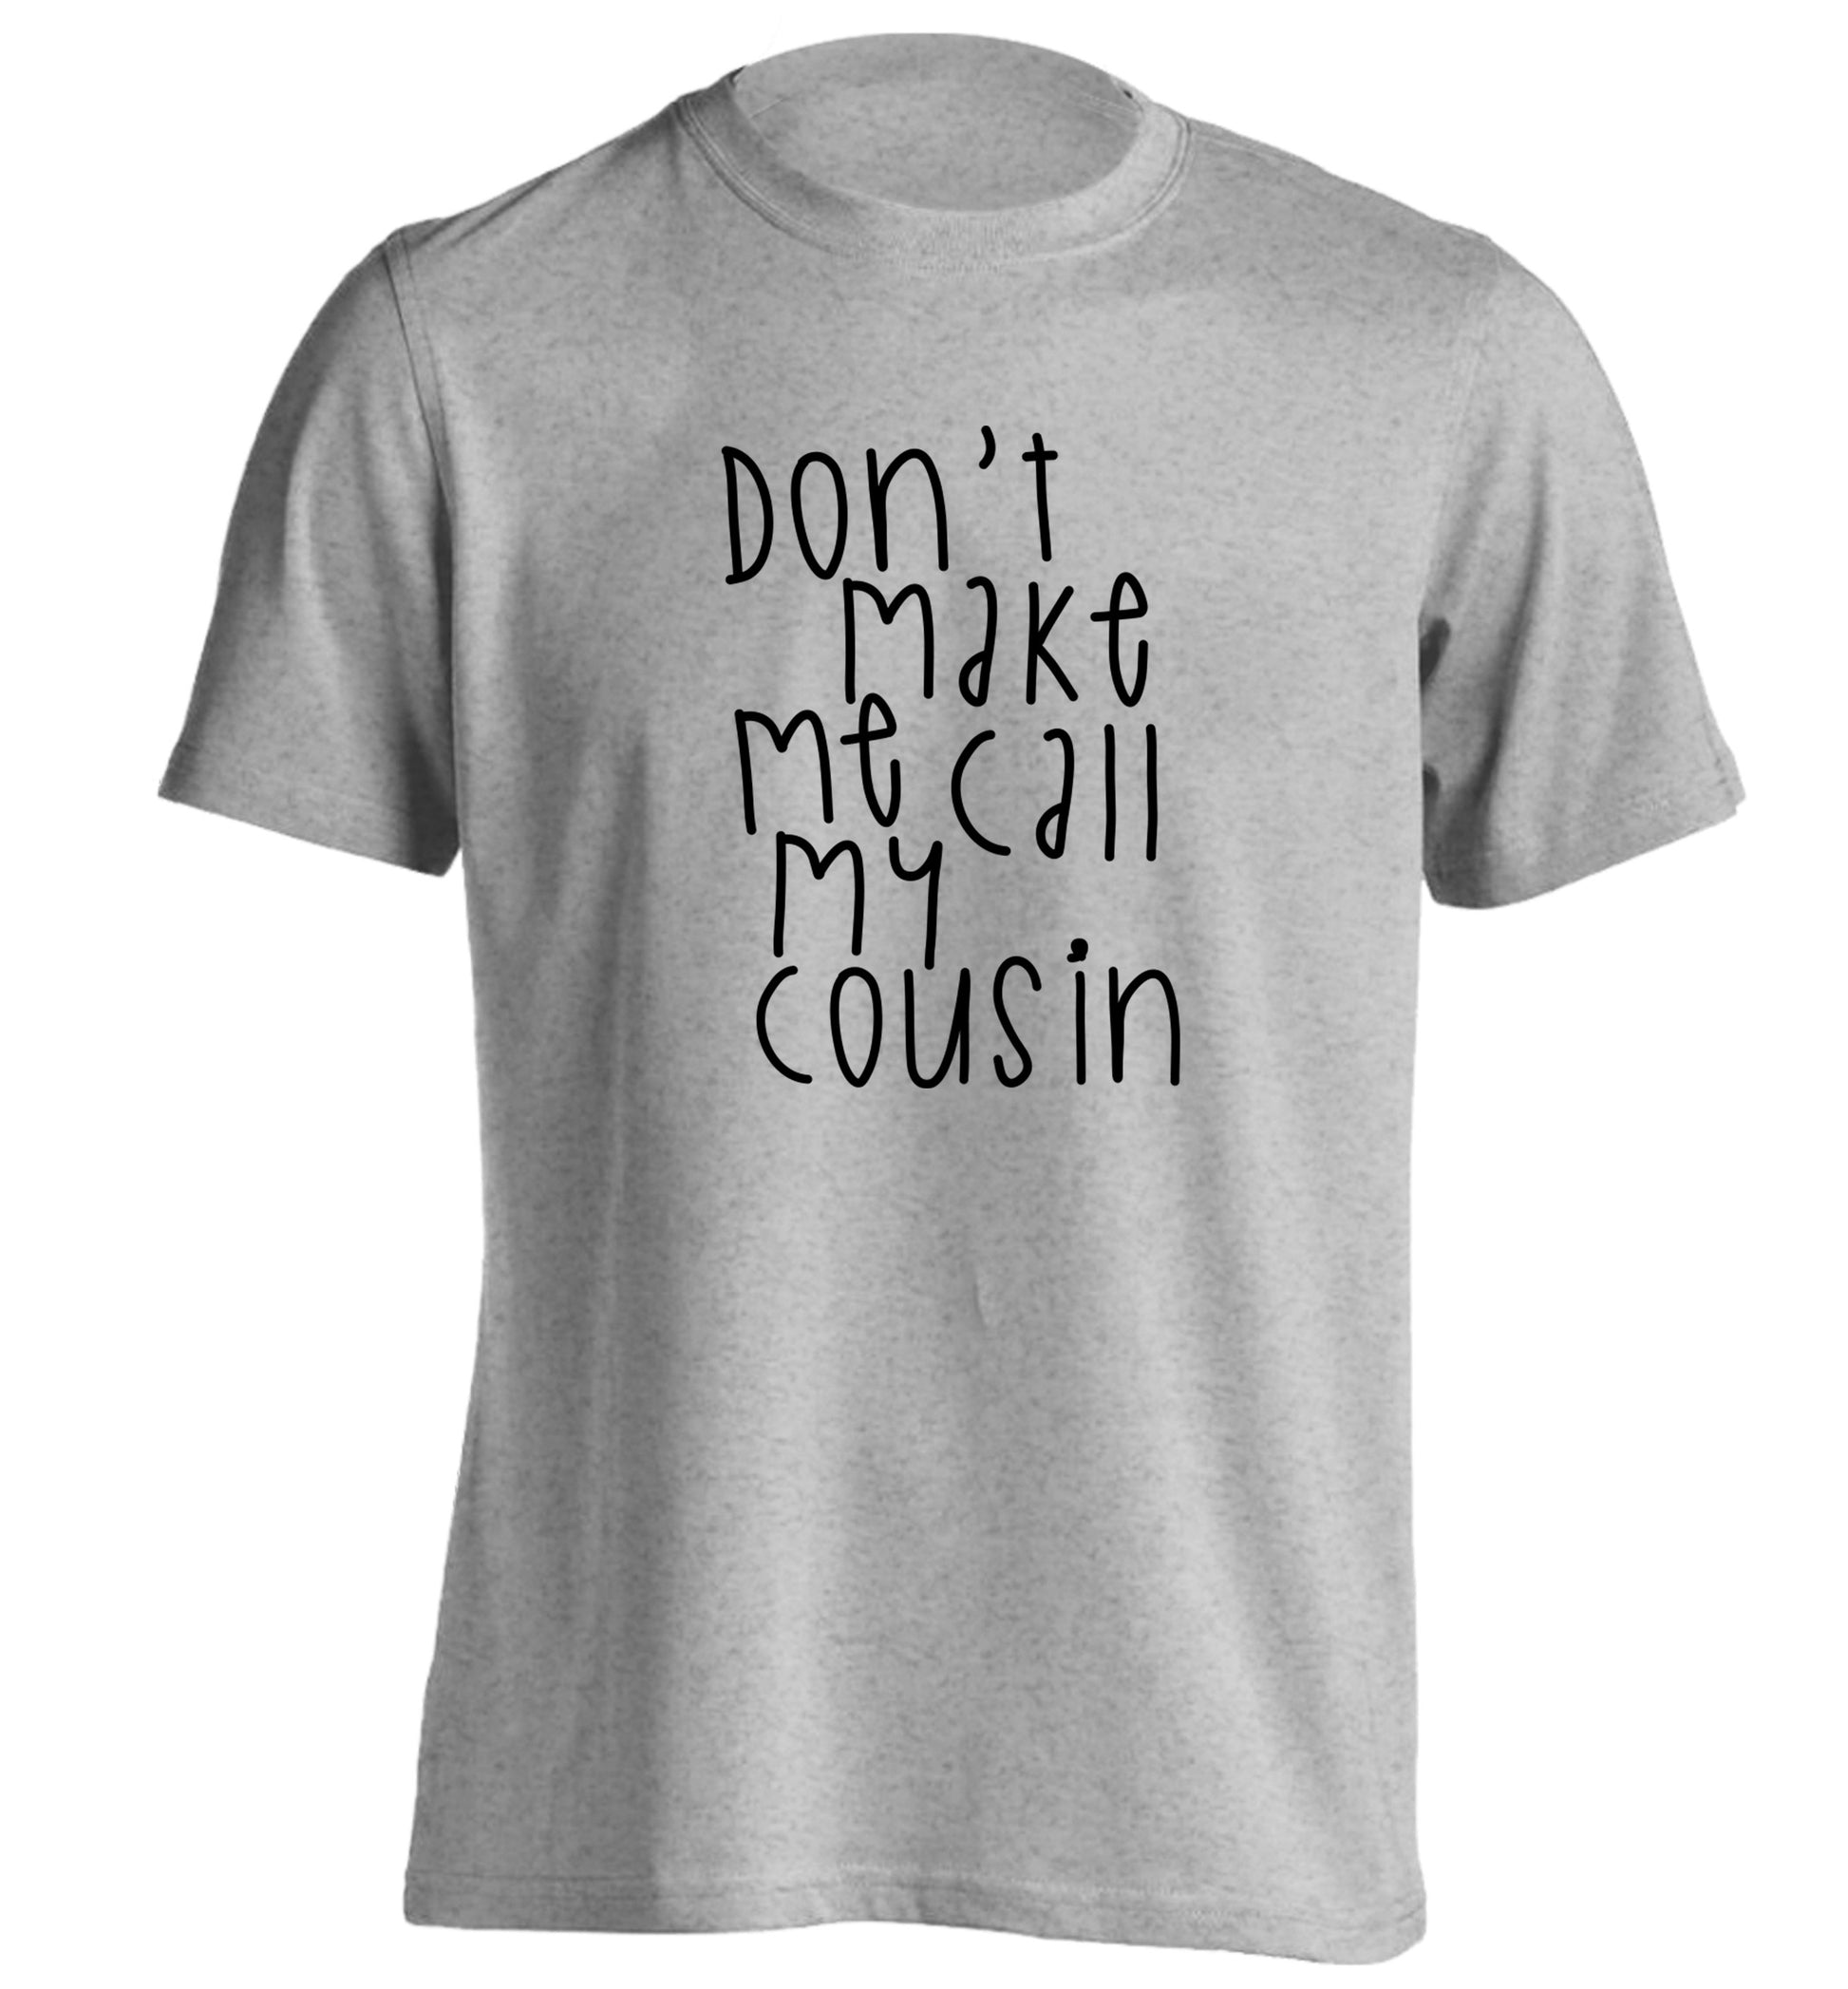 Don't make me call my cousin adults unisex grey Tshirt 2XL